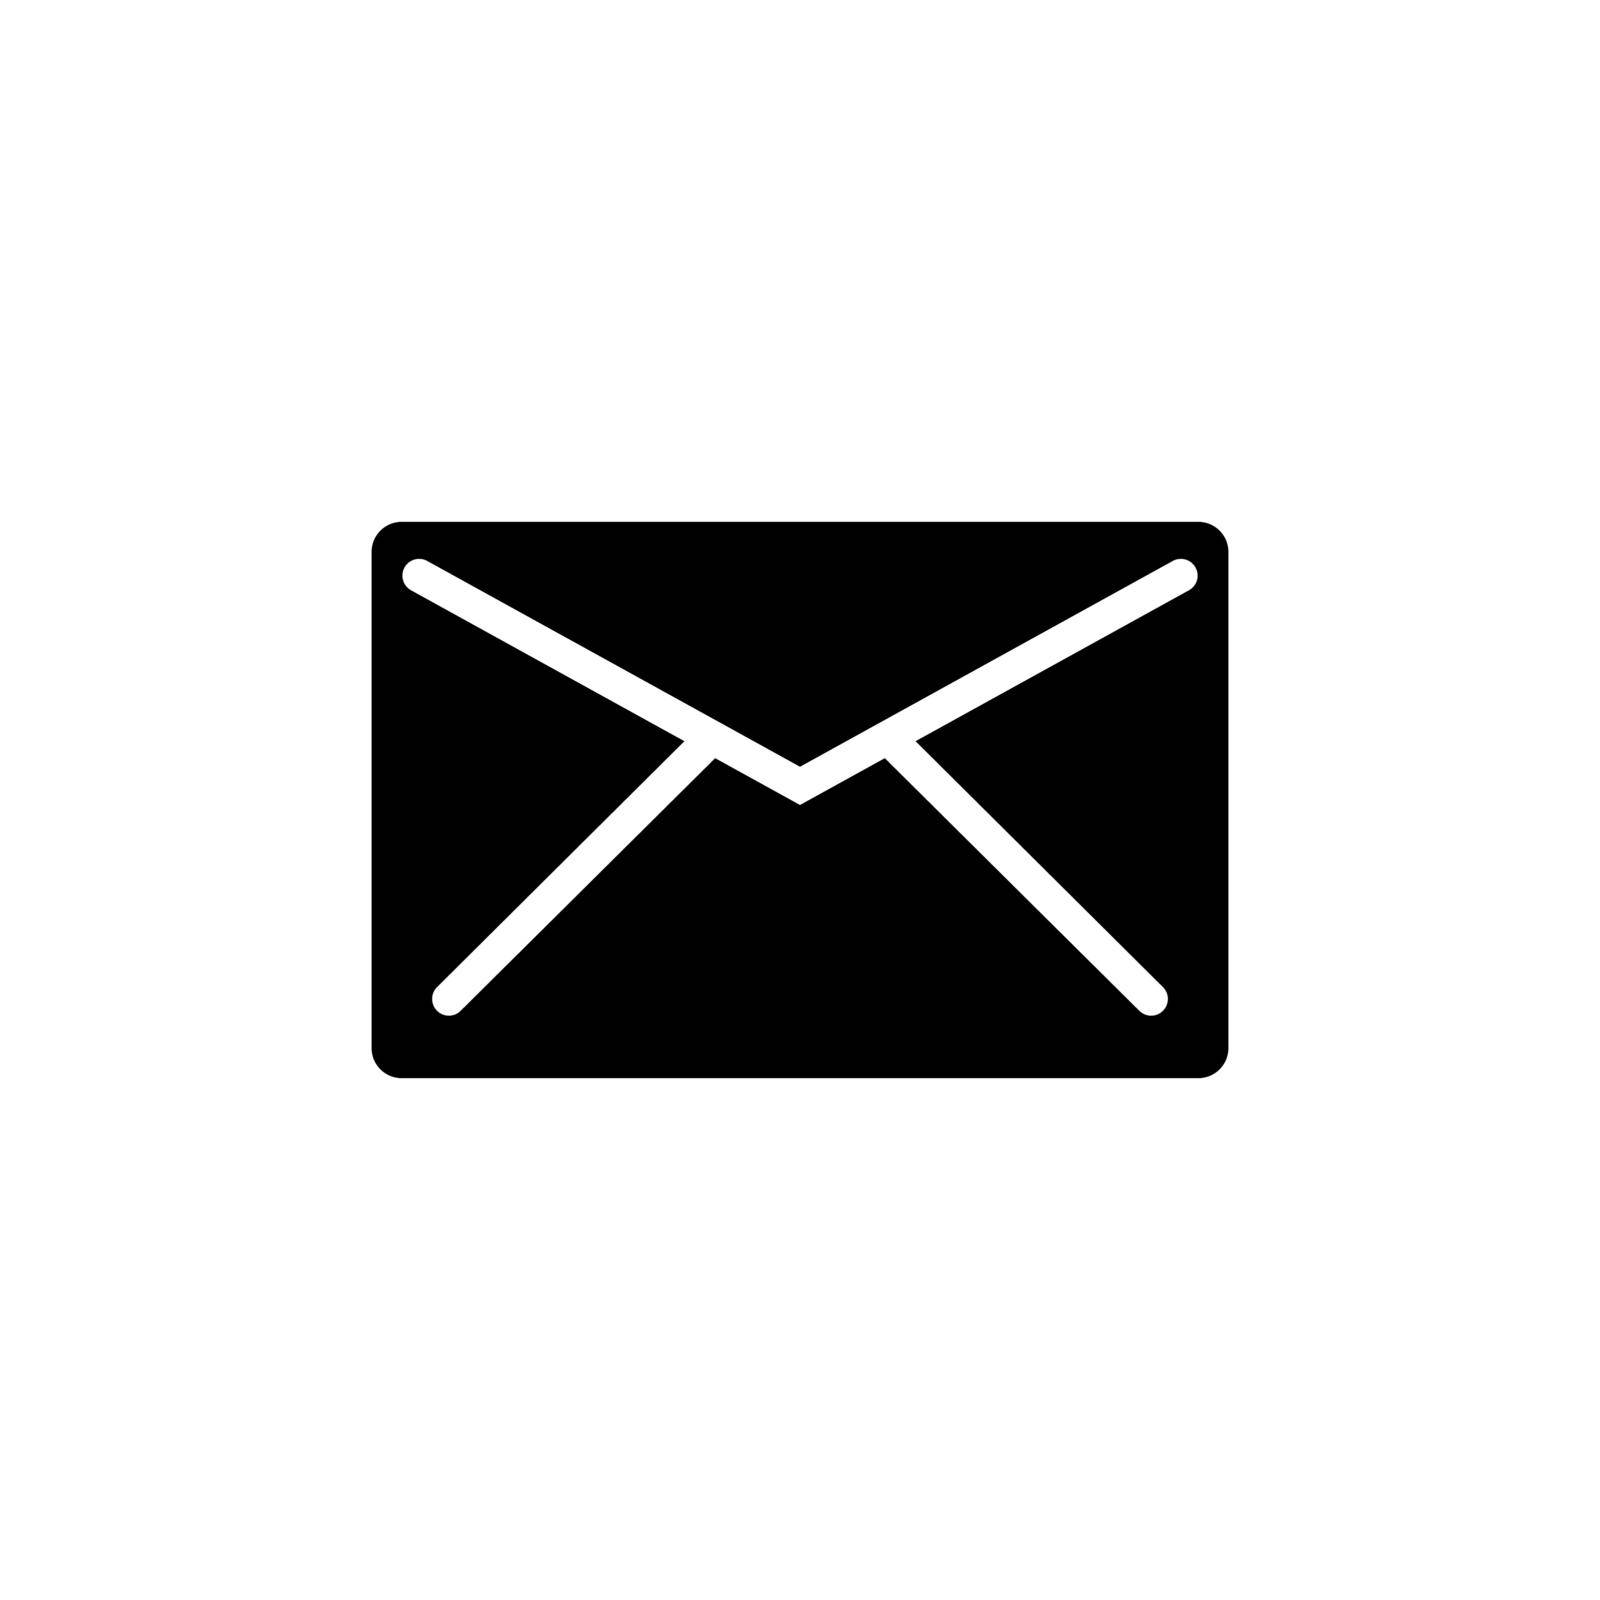 Envelope Mail, Letter, Correspondence Flat Vector Icon by sfinks